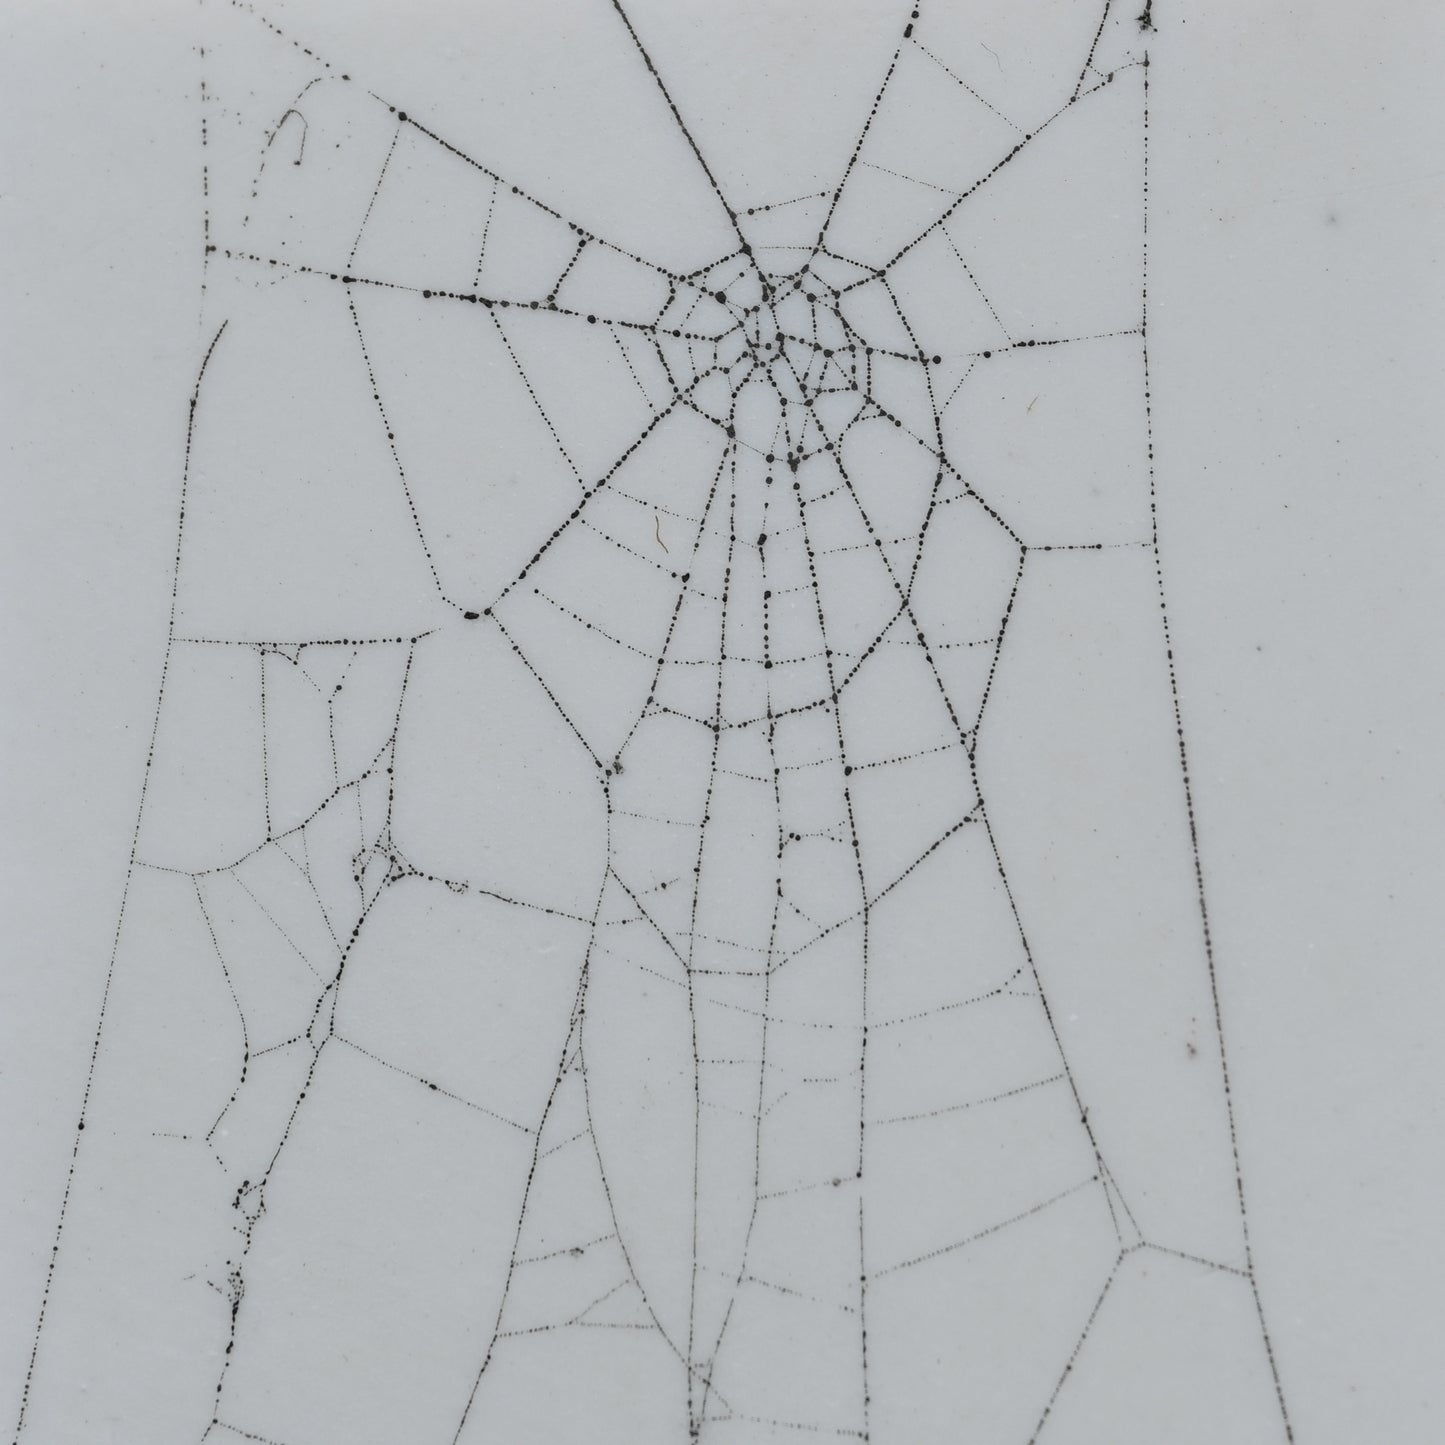 Web on Clay (146), Collected August 25, 2022